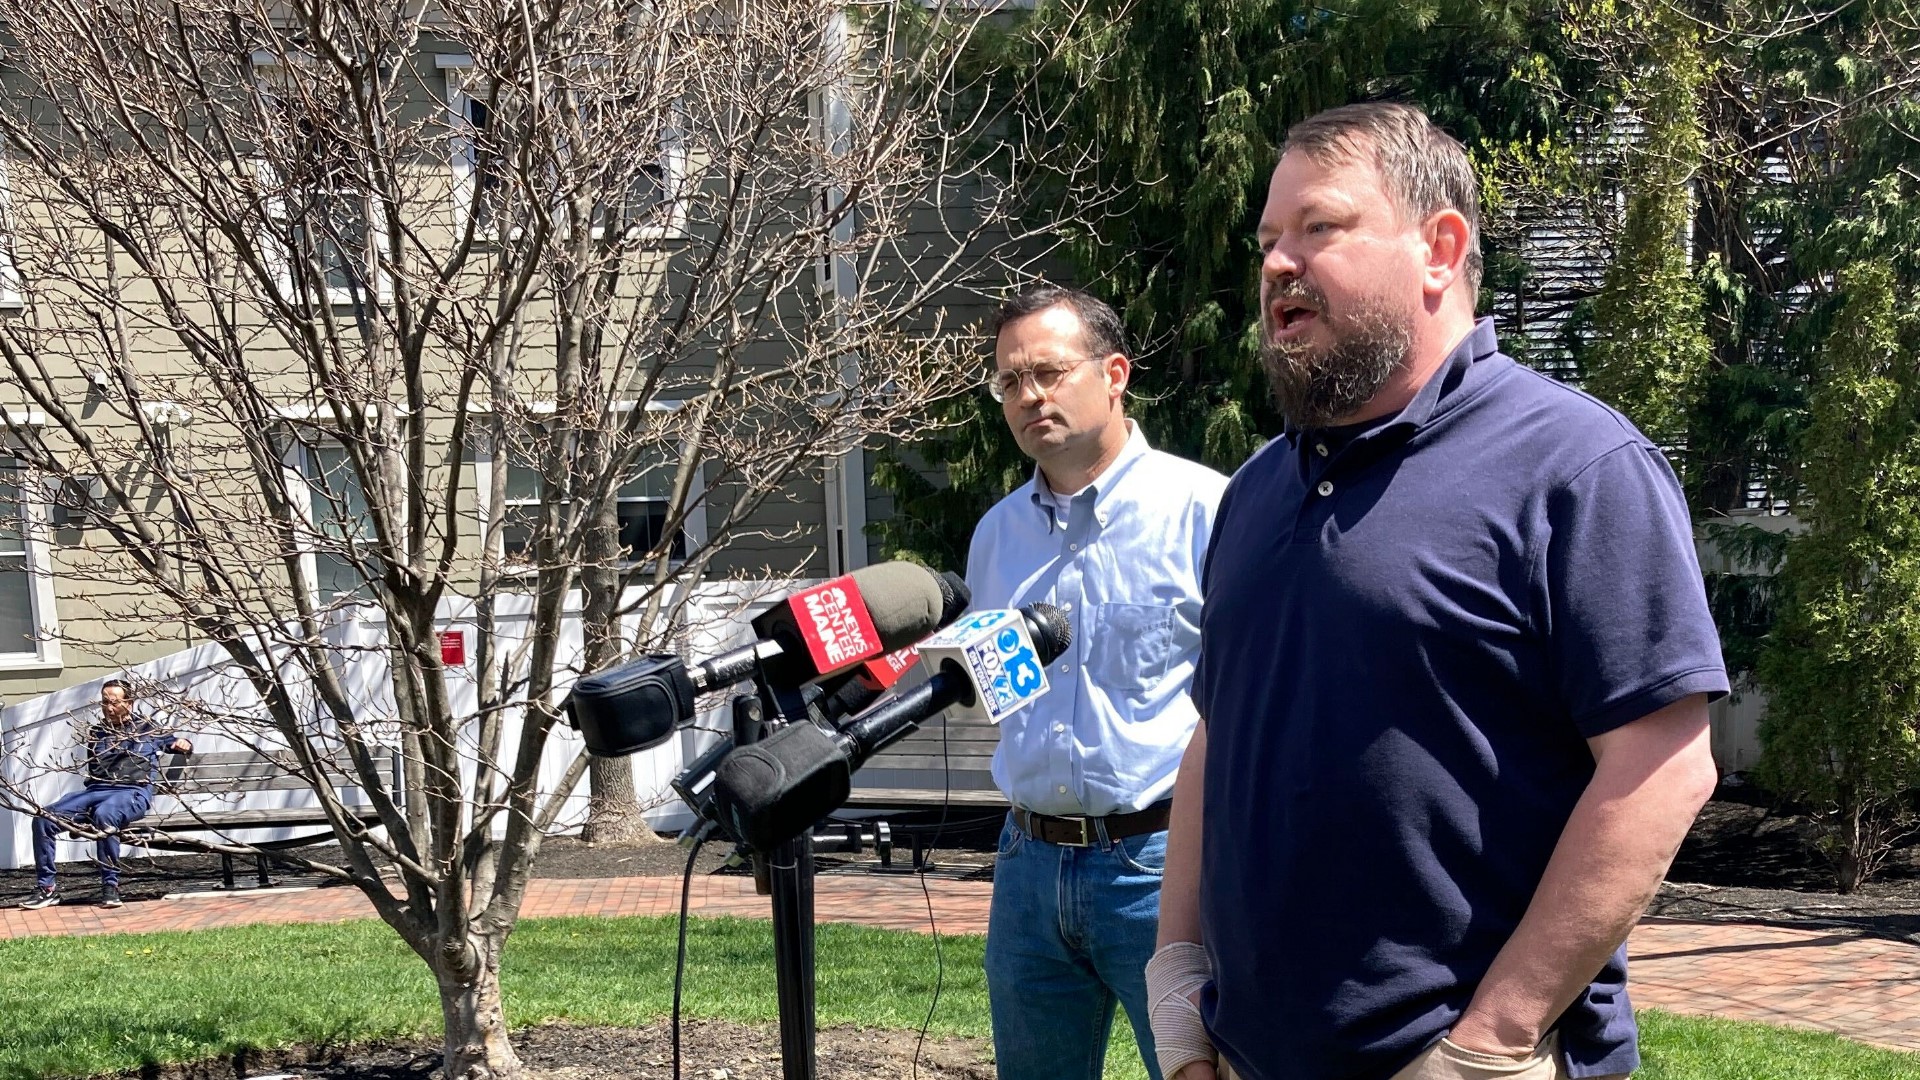 Sean Halsey spoke Friday and shared updates about the shooting injuries he and his two children suffered while driving on I-295 Tuesday, April 18.